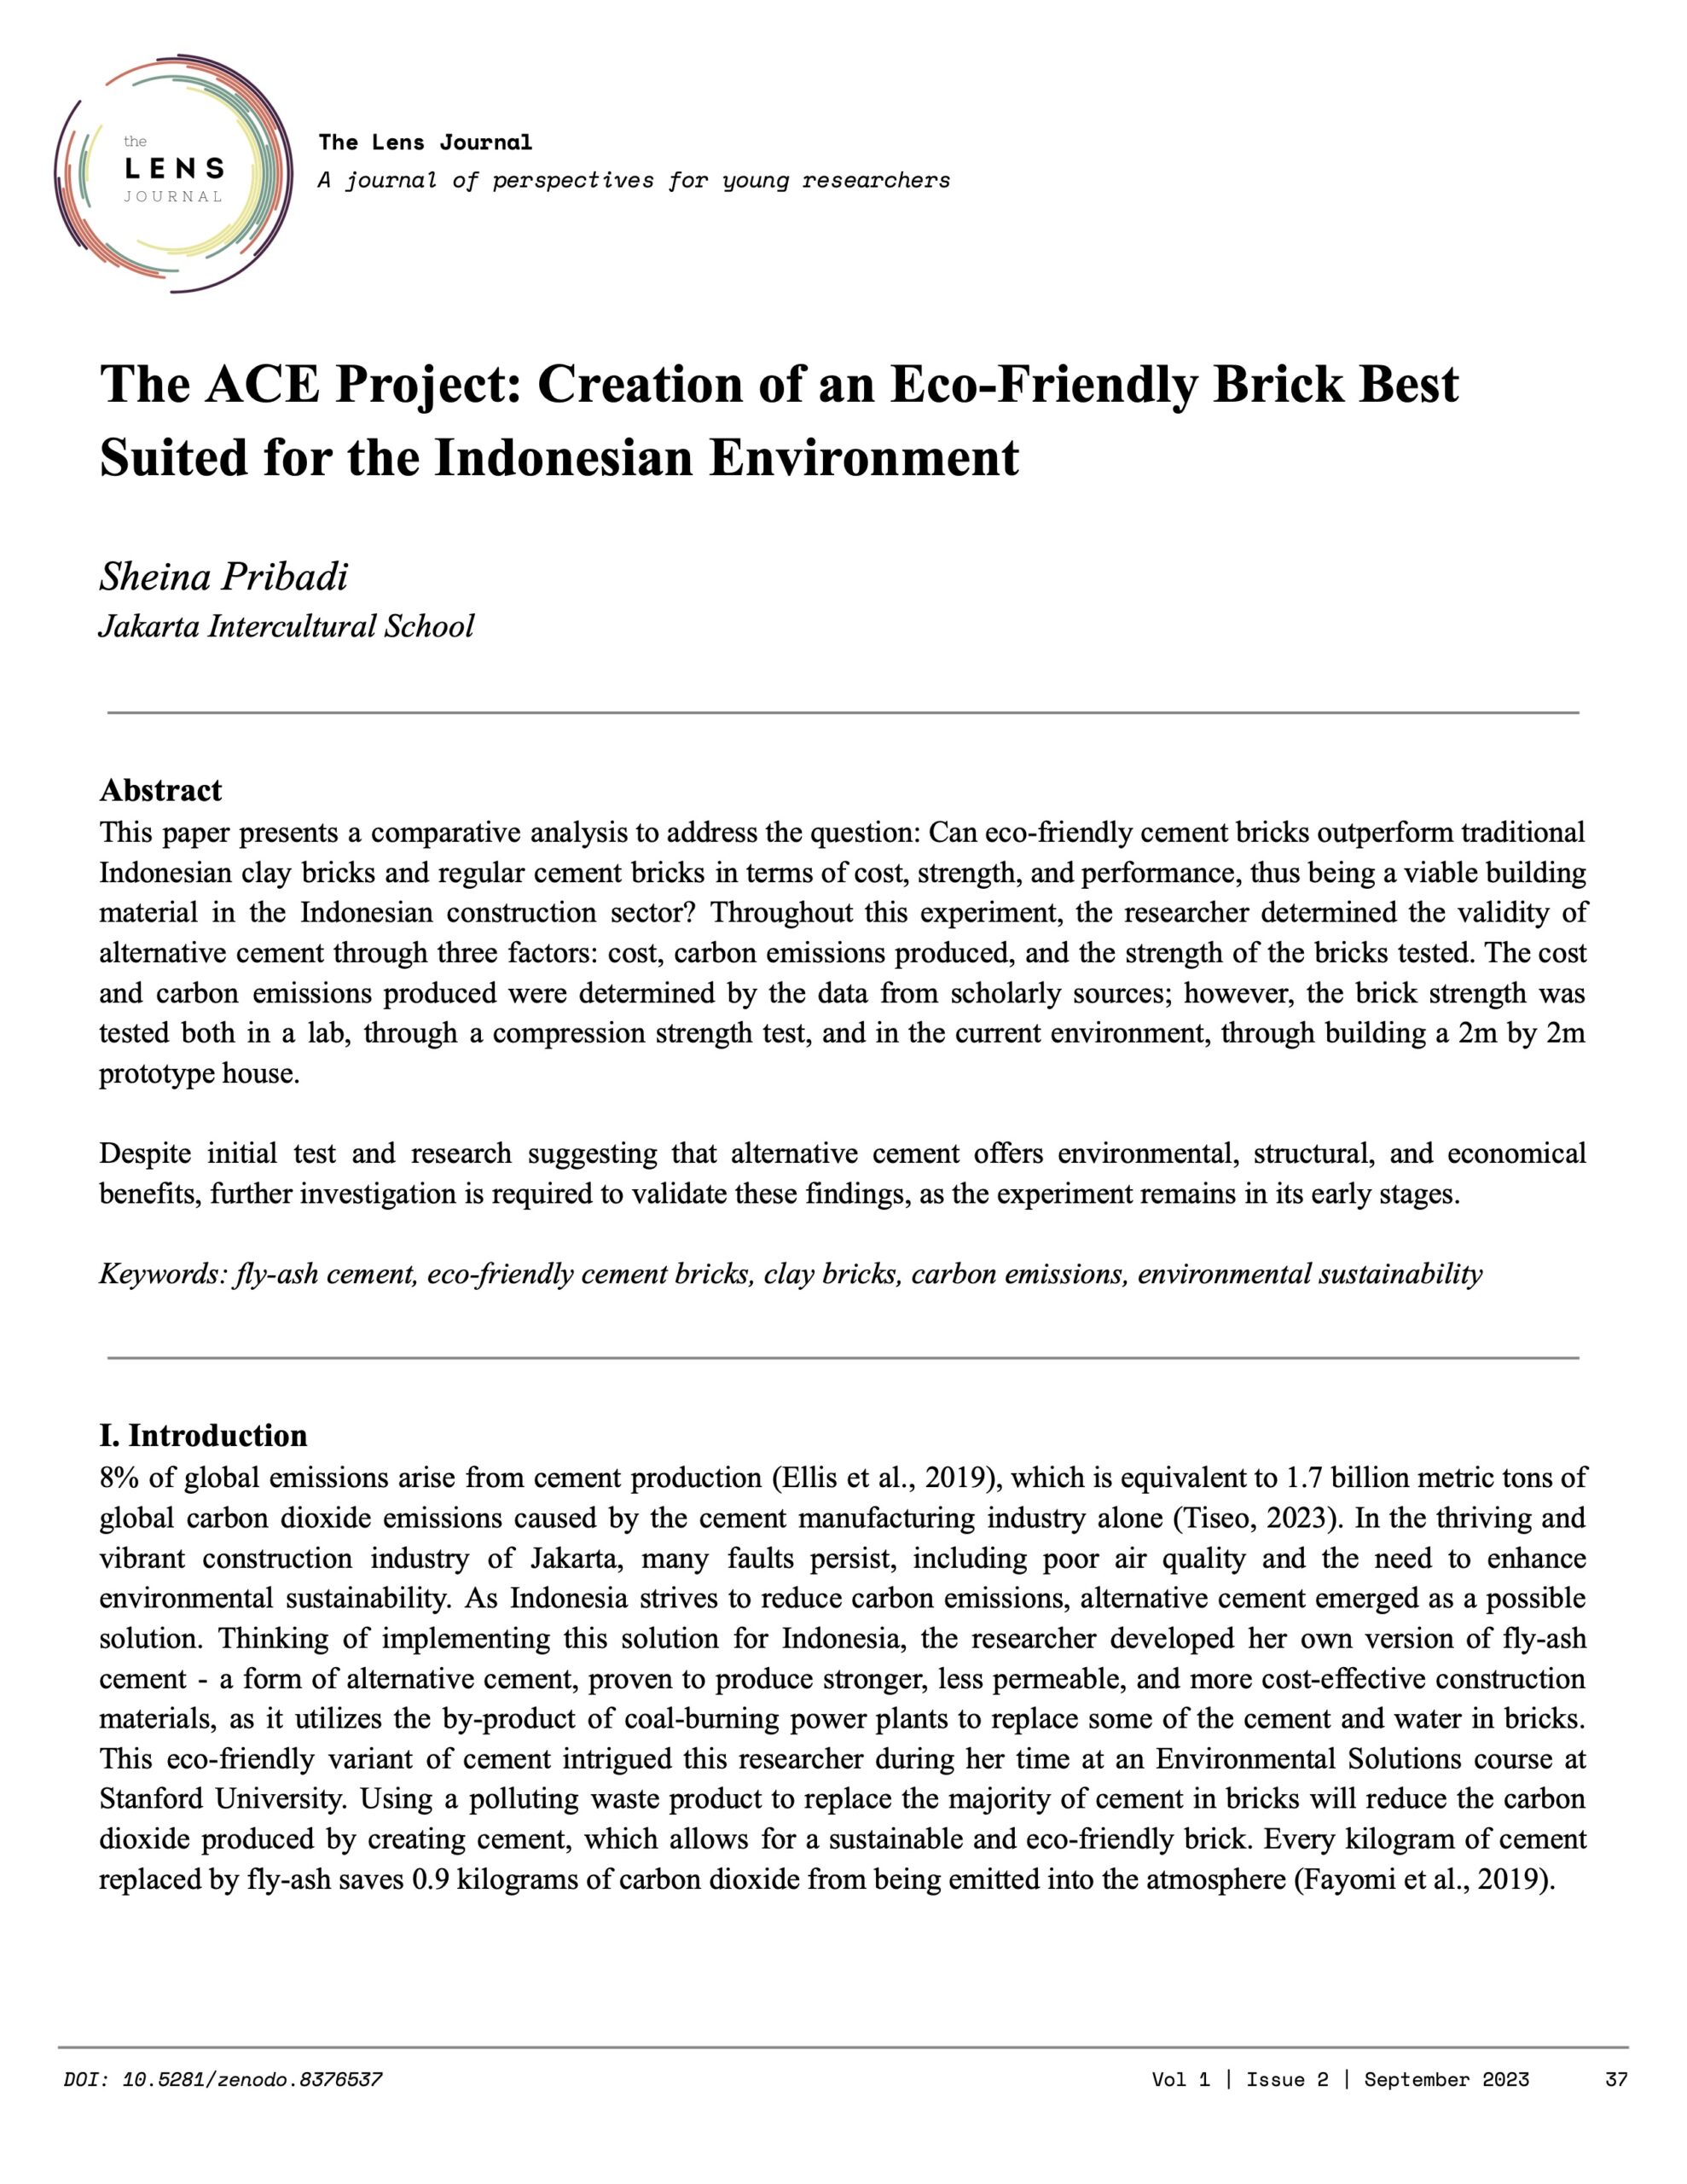 The ACE Project: Creation of an Eco-Friendly Brick Best Suited for the Indonesian Environment